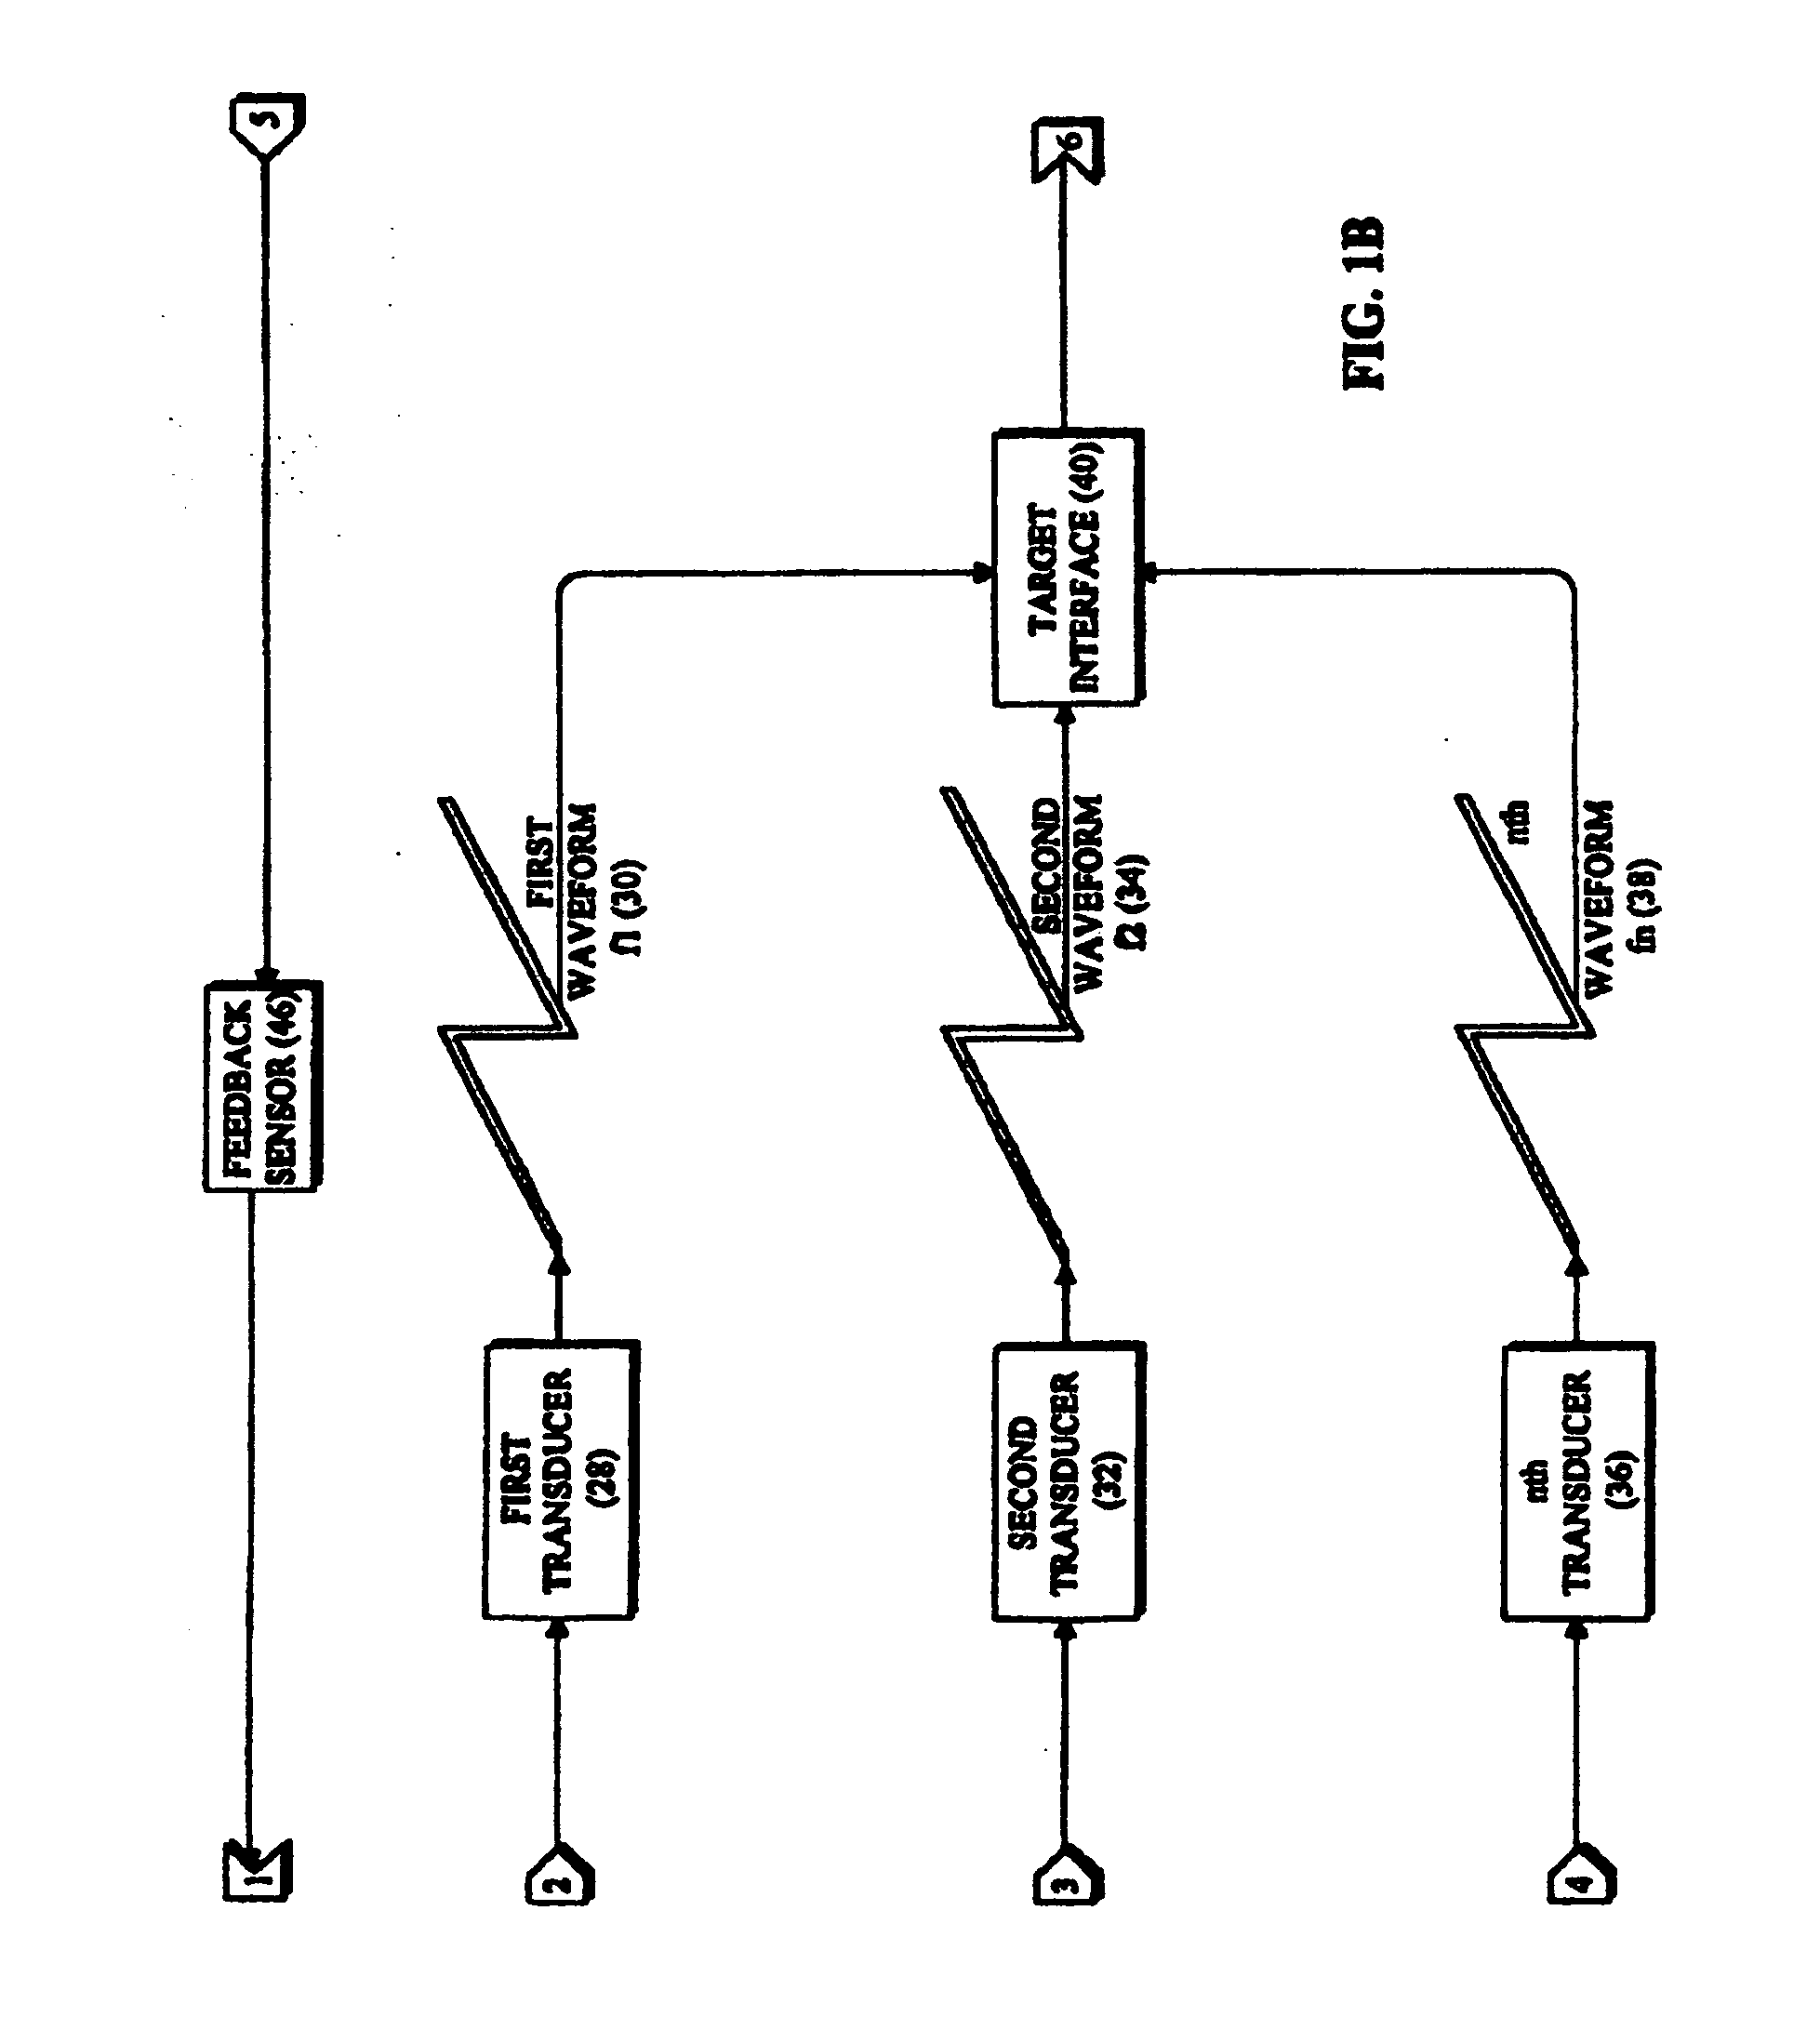 Neoplastic cell destruction device and method utilizing low frequency sound waves to disrupt or displace cellular materials